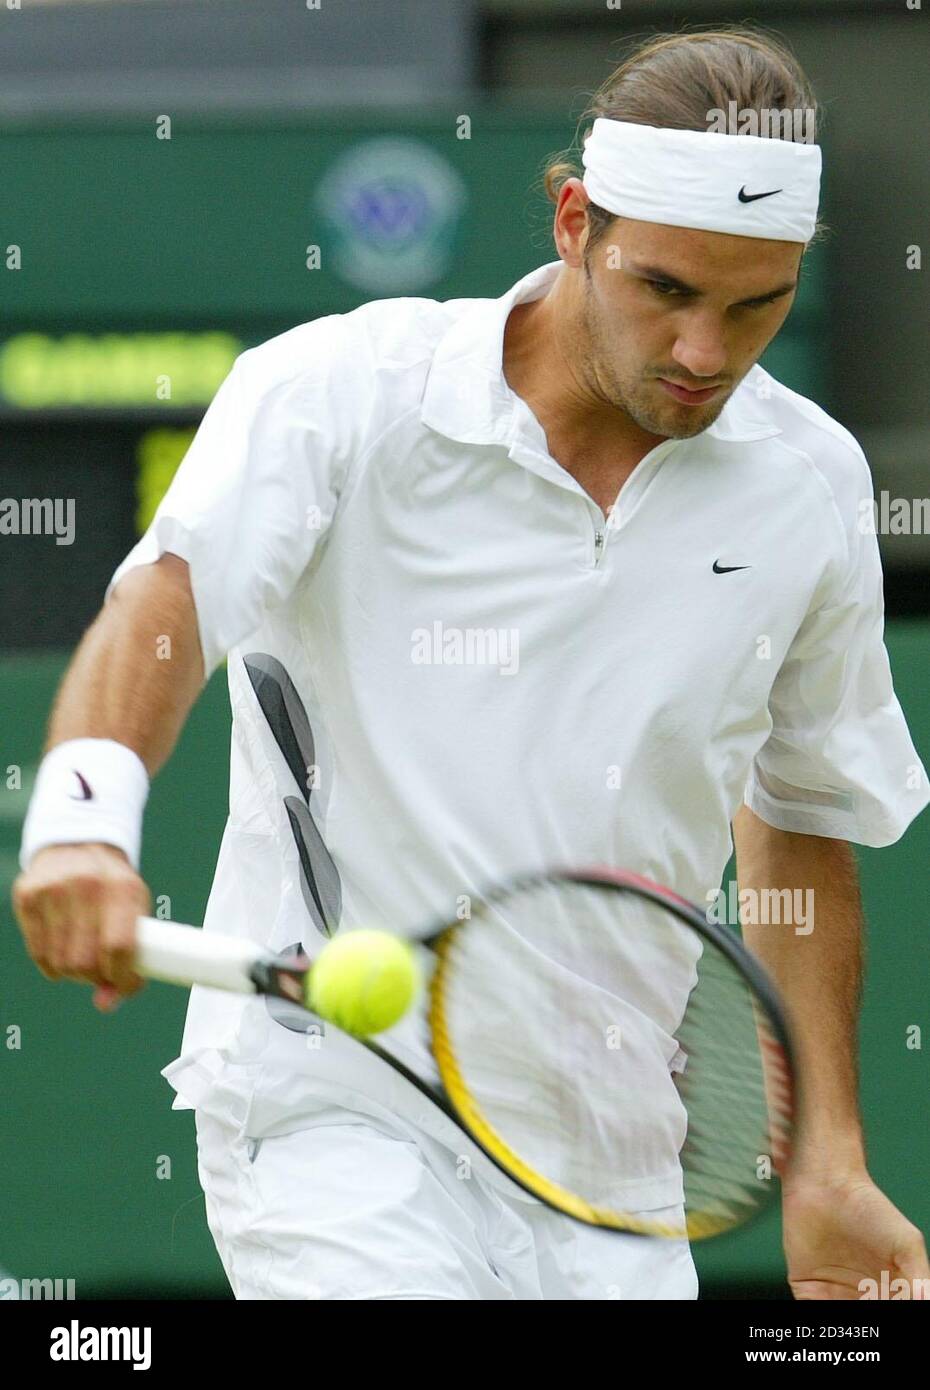 EDITORIAL USE ONLY, NO MOBILE PHONE USE. Roger Federer from Switzerland in action against Andy Roddick from the USA in the men's semi-final at the All England Lawn Tennis Championships in Wimbledon. Stock Photo